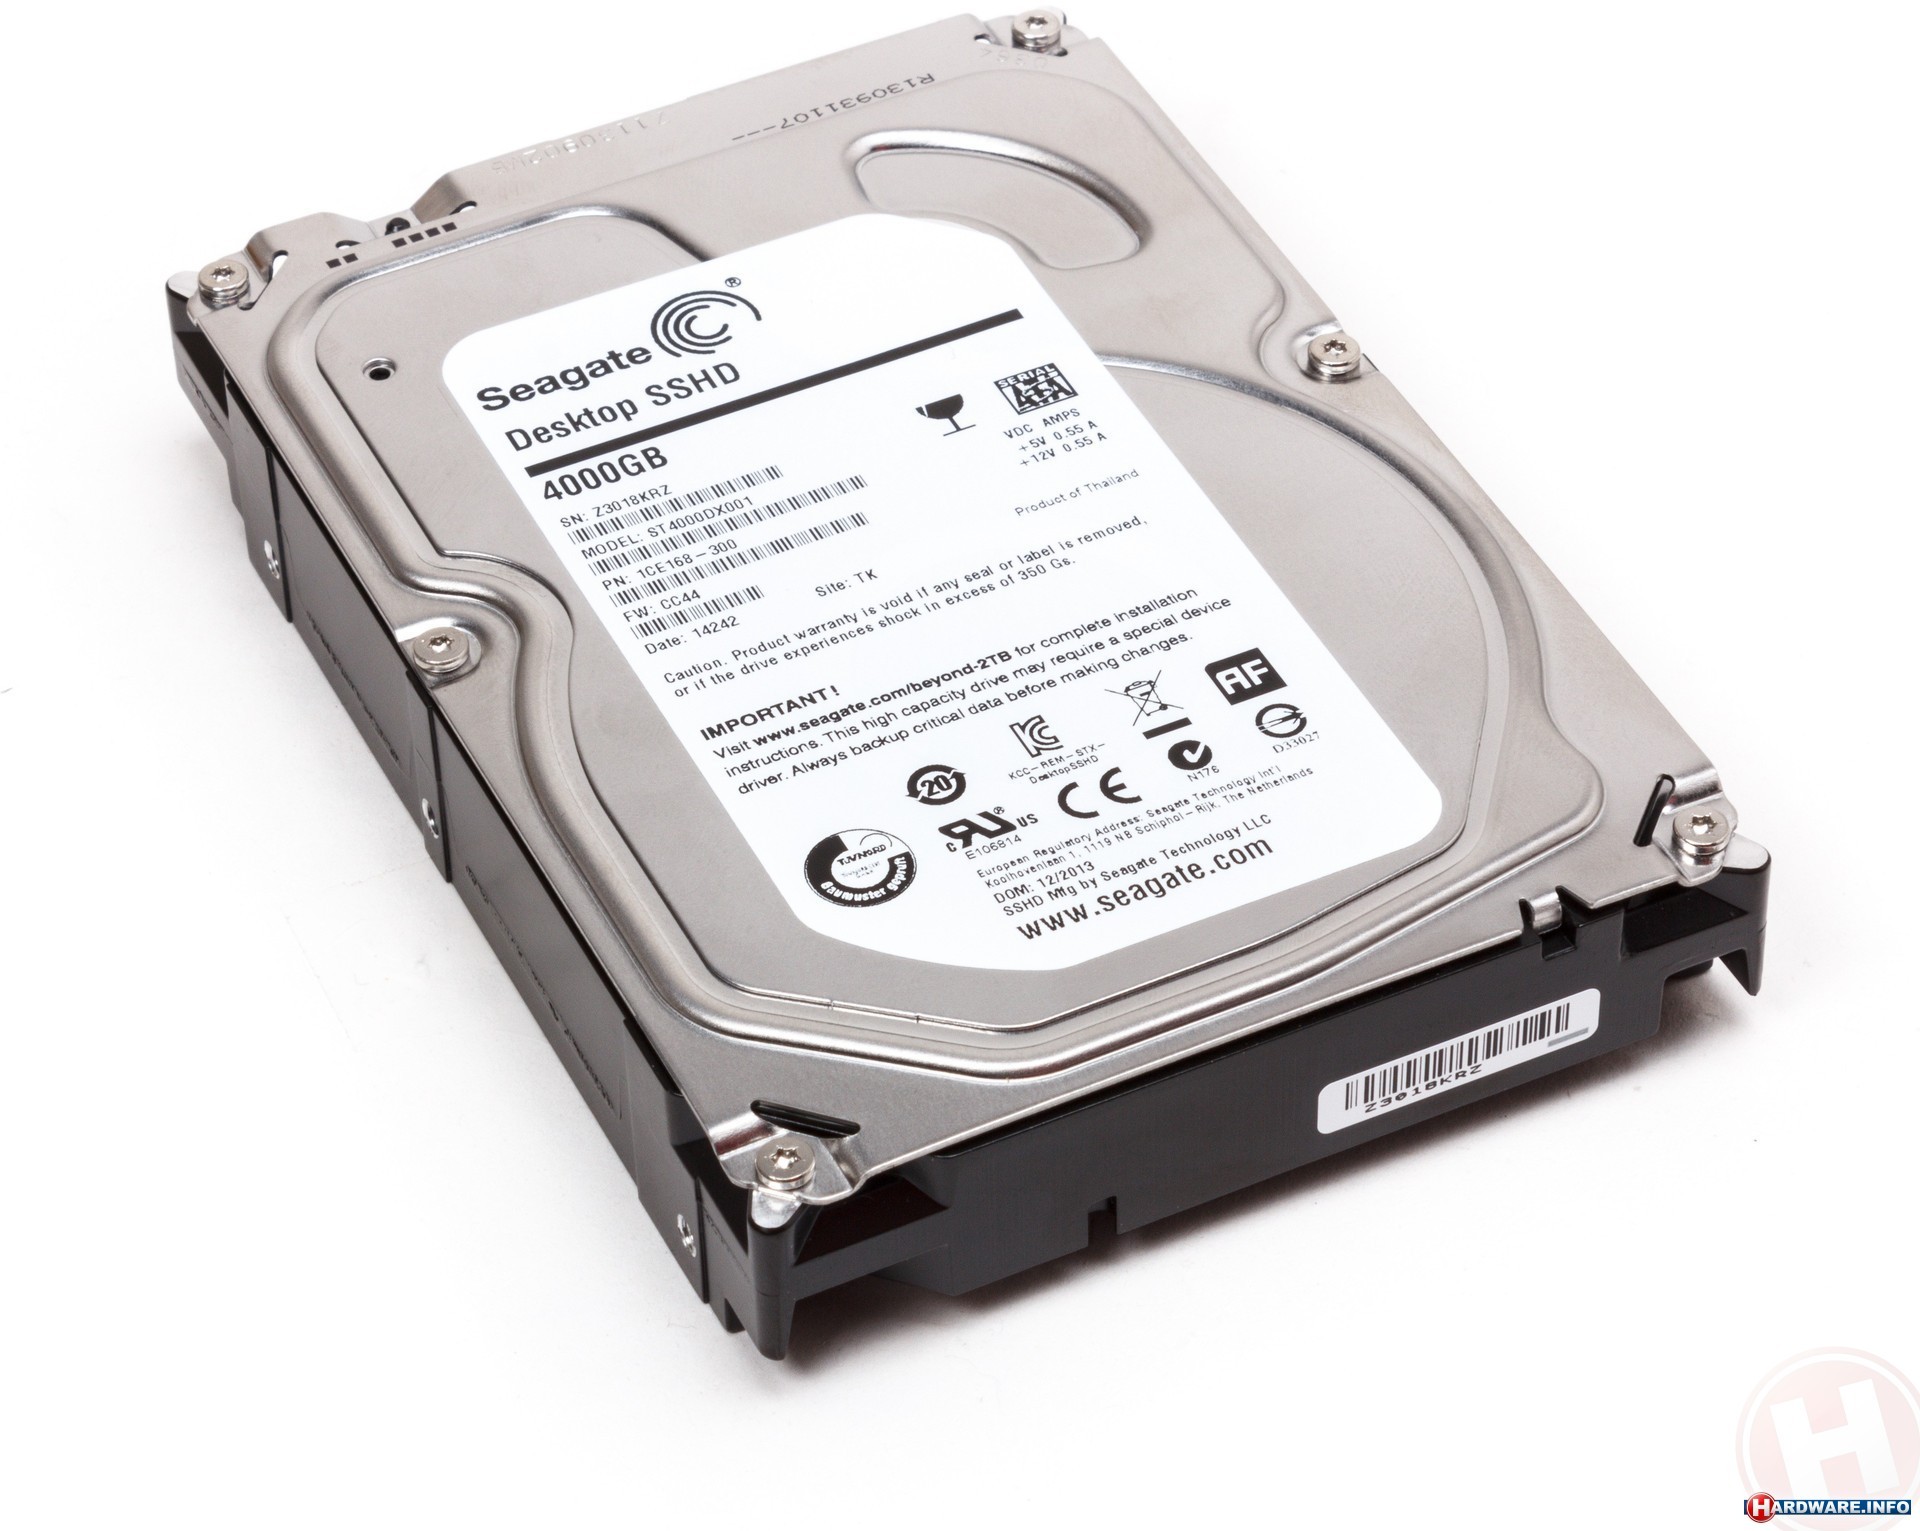 Seagate Pics, Technology Collection